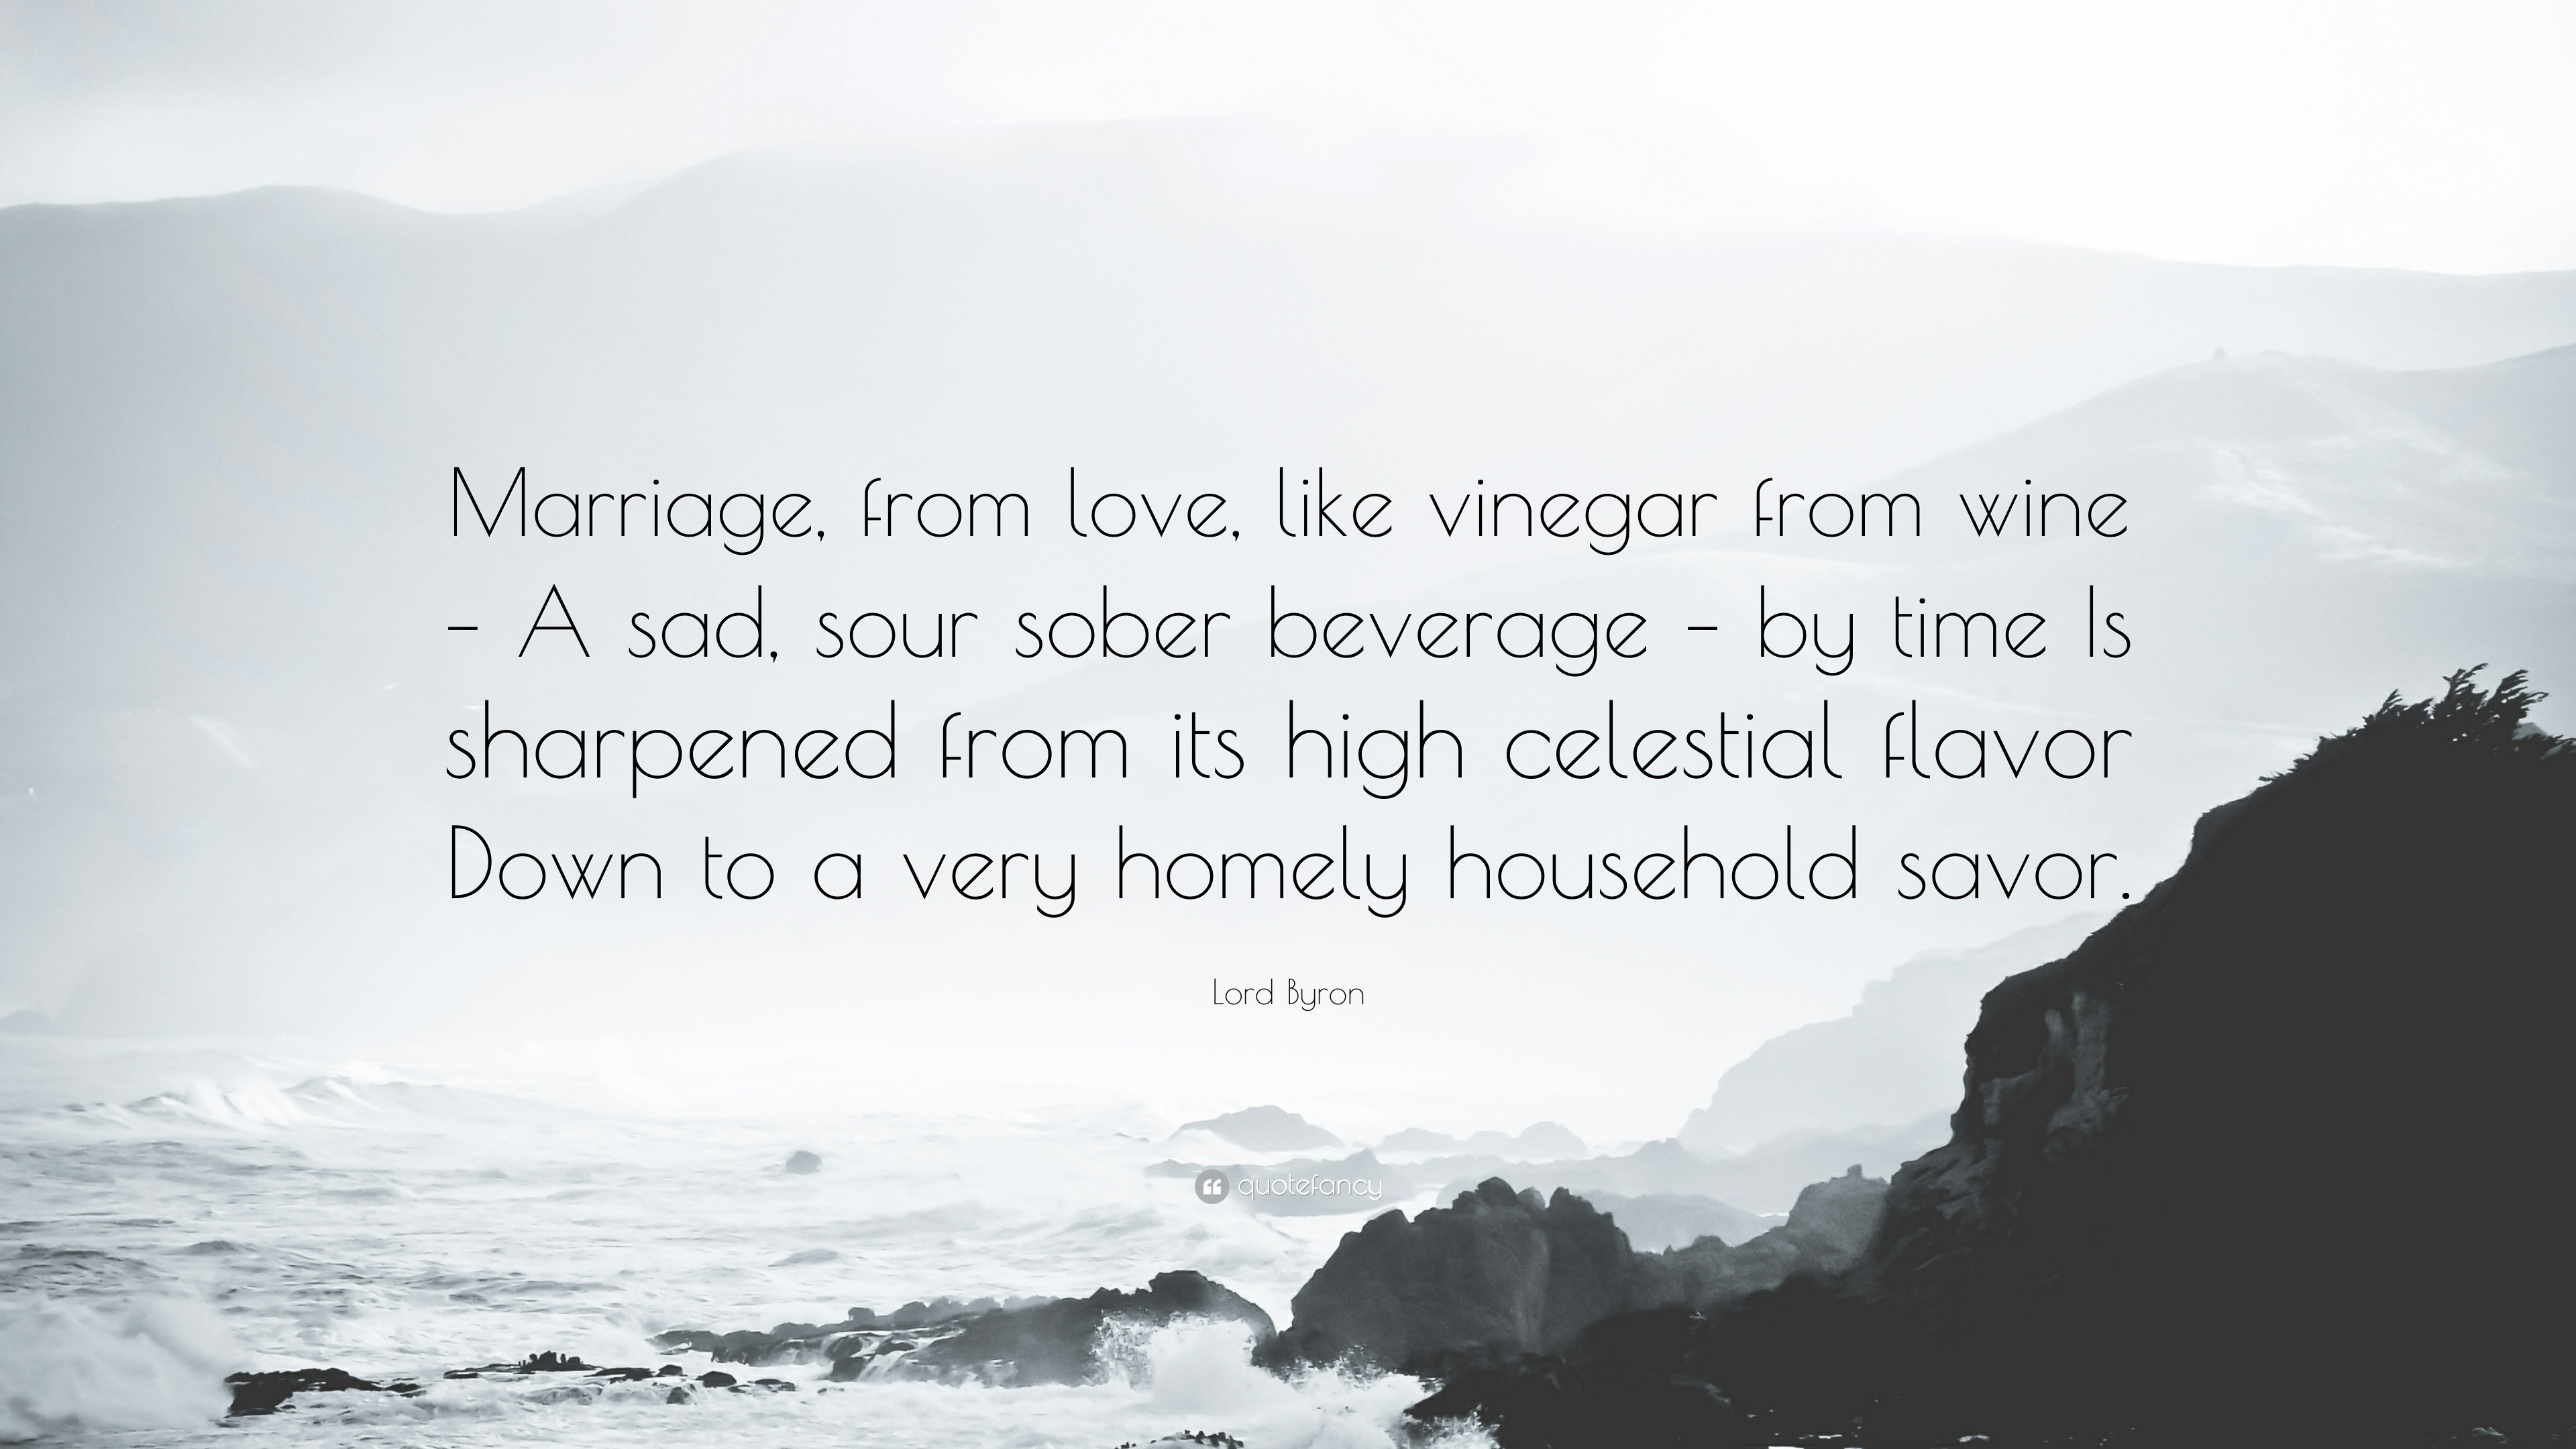 Lord Byron Quote “Marriage from love like vinegar from wine – A